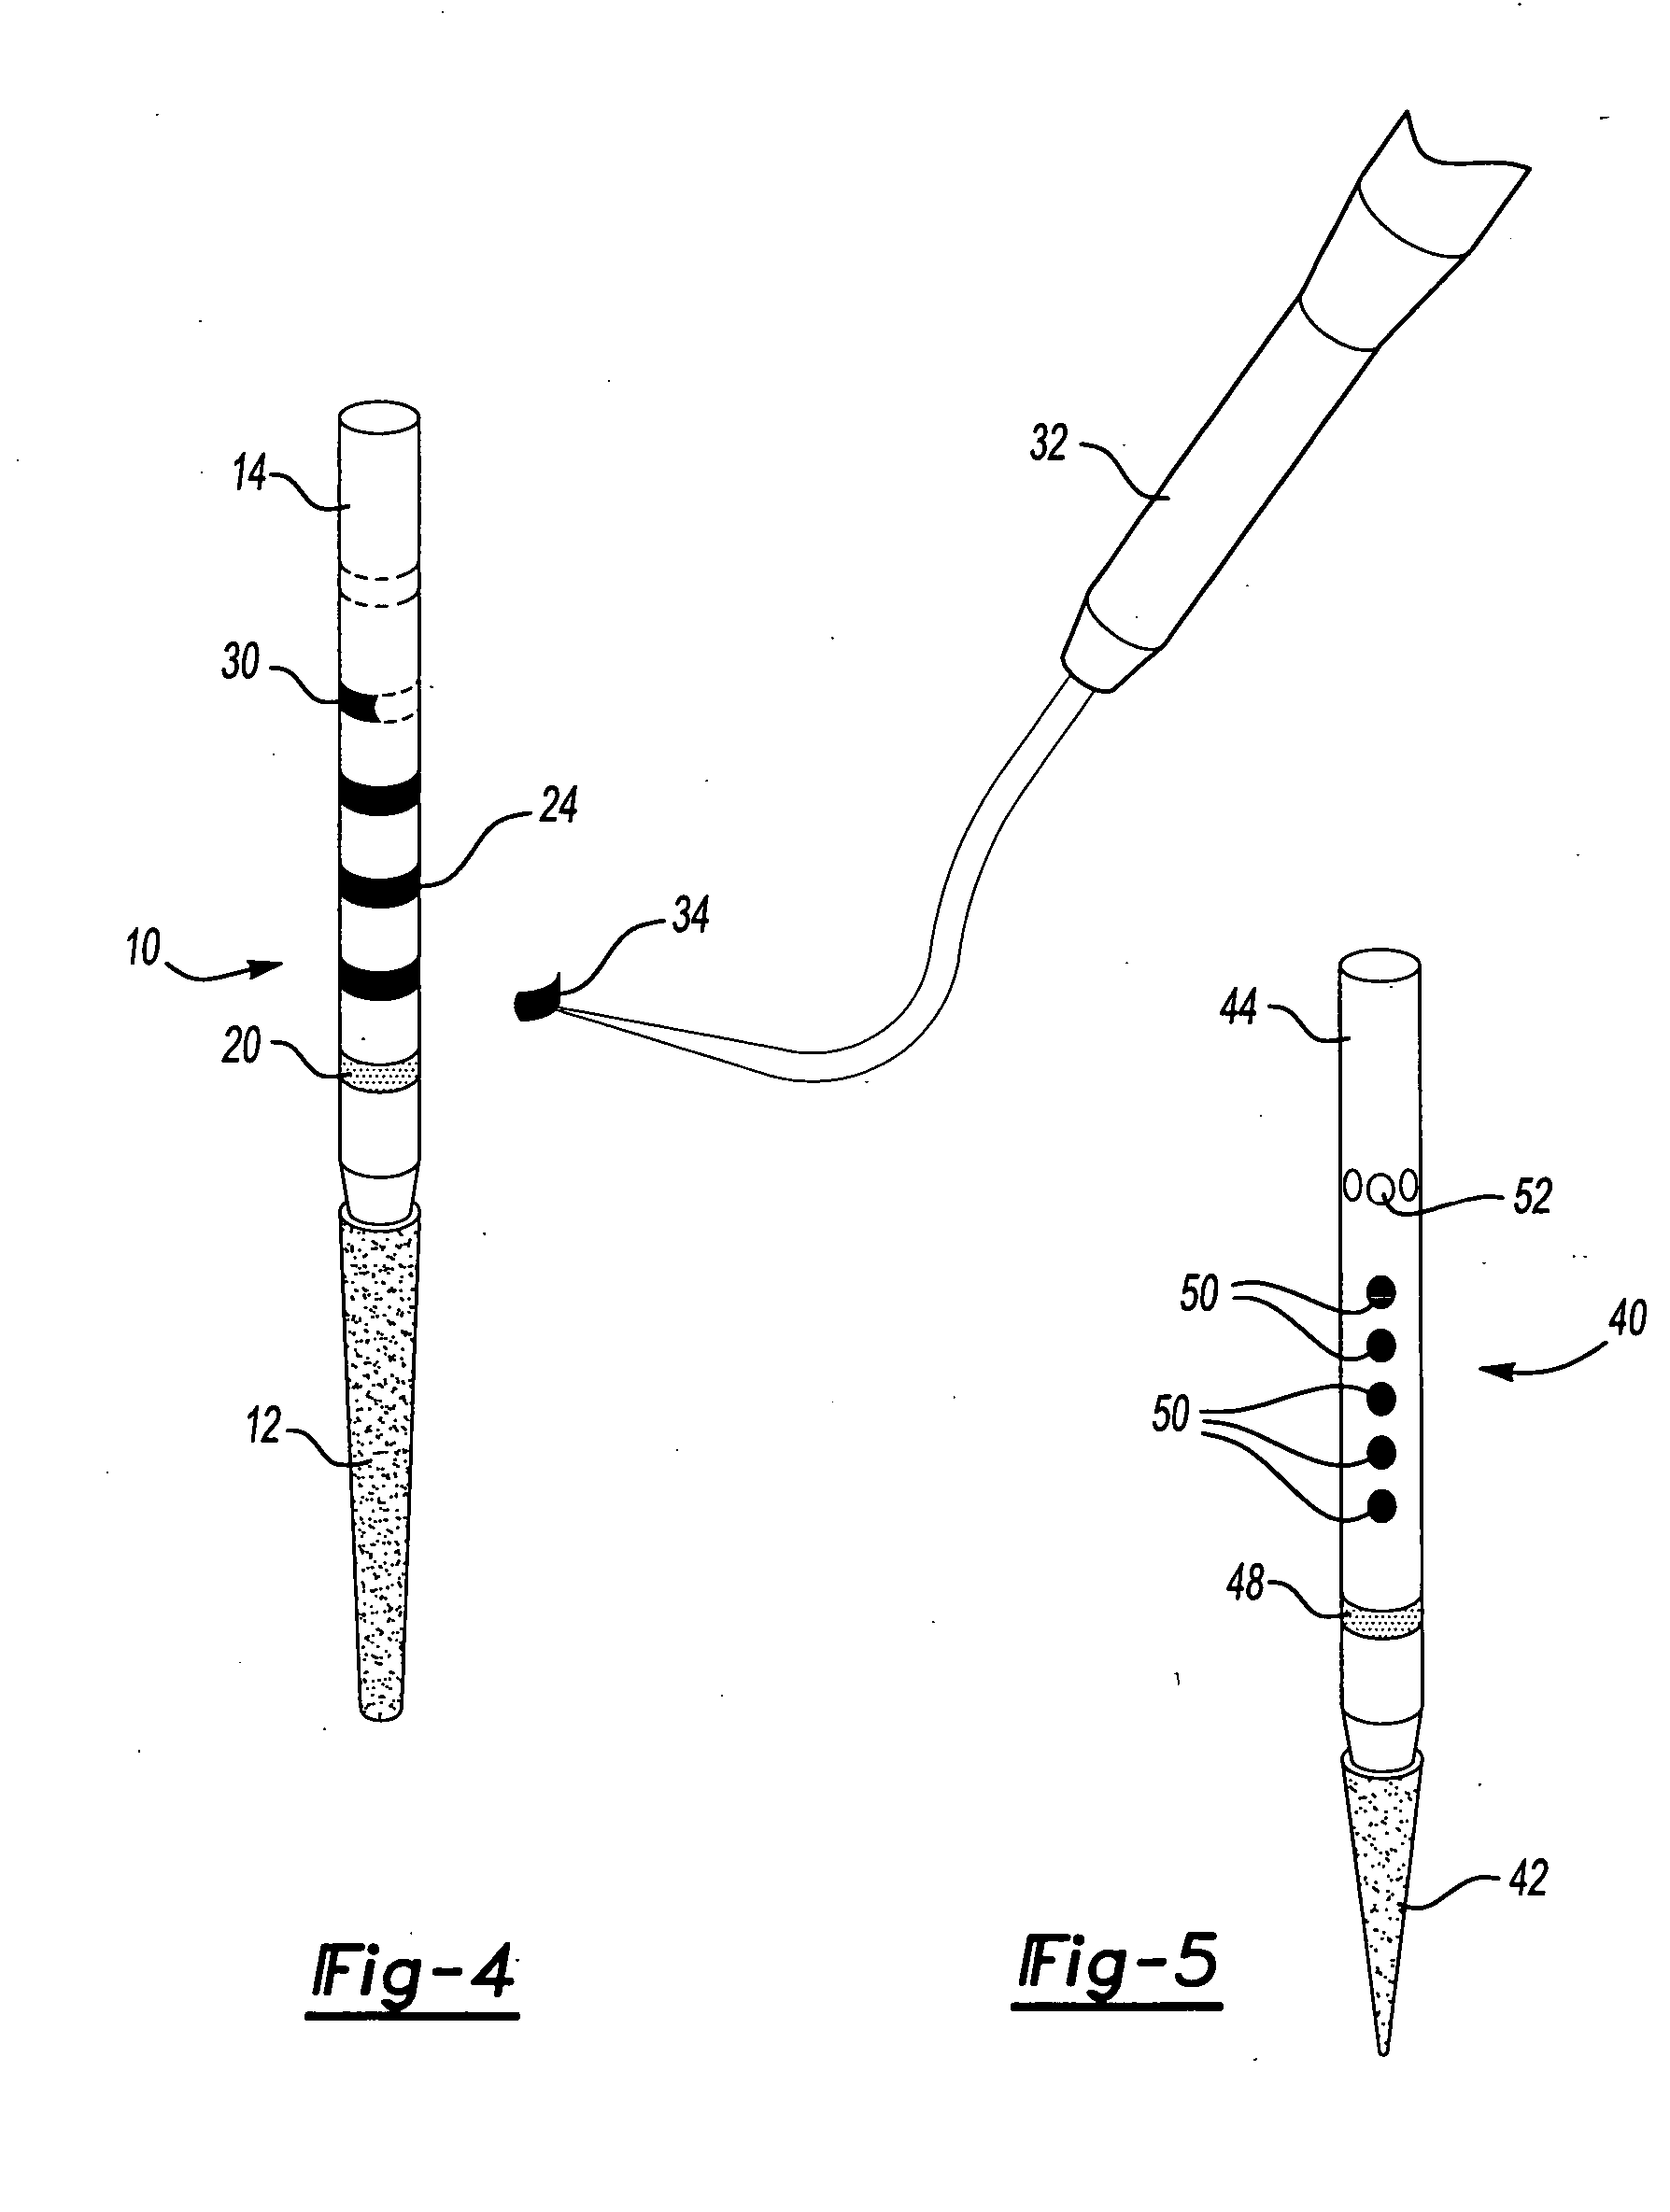 Dental bur with use history recording rings and method of recording the number of uses of a dental bur